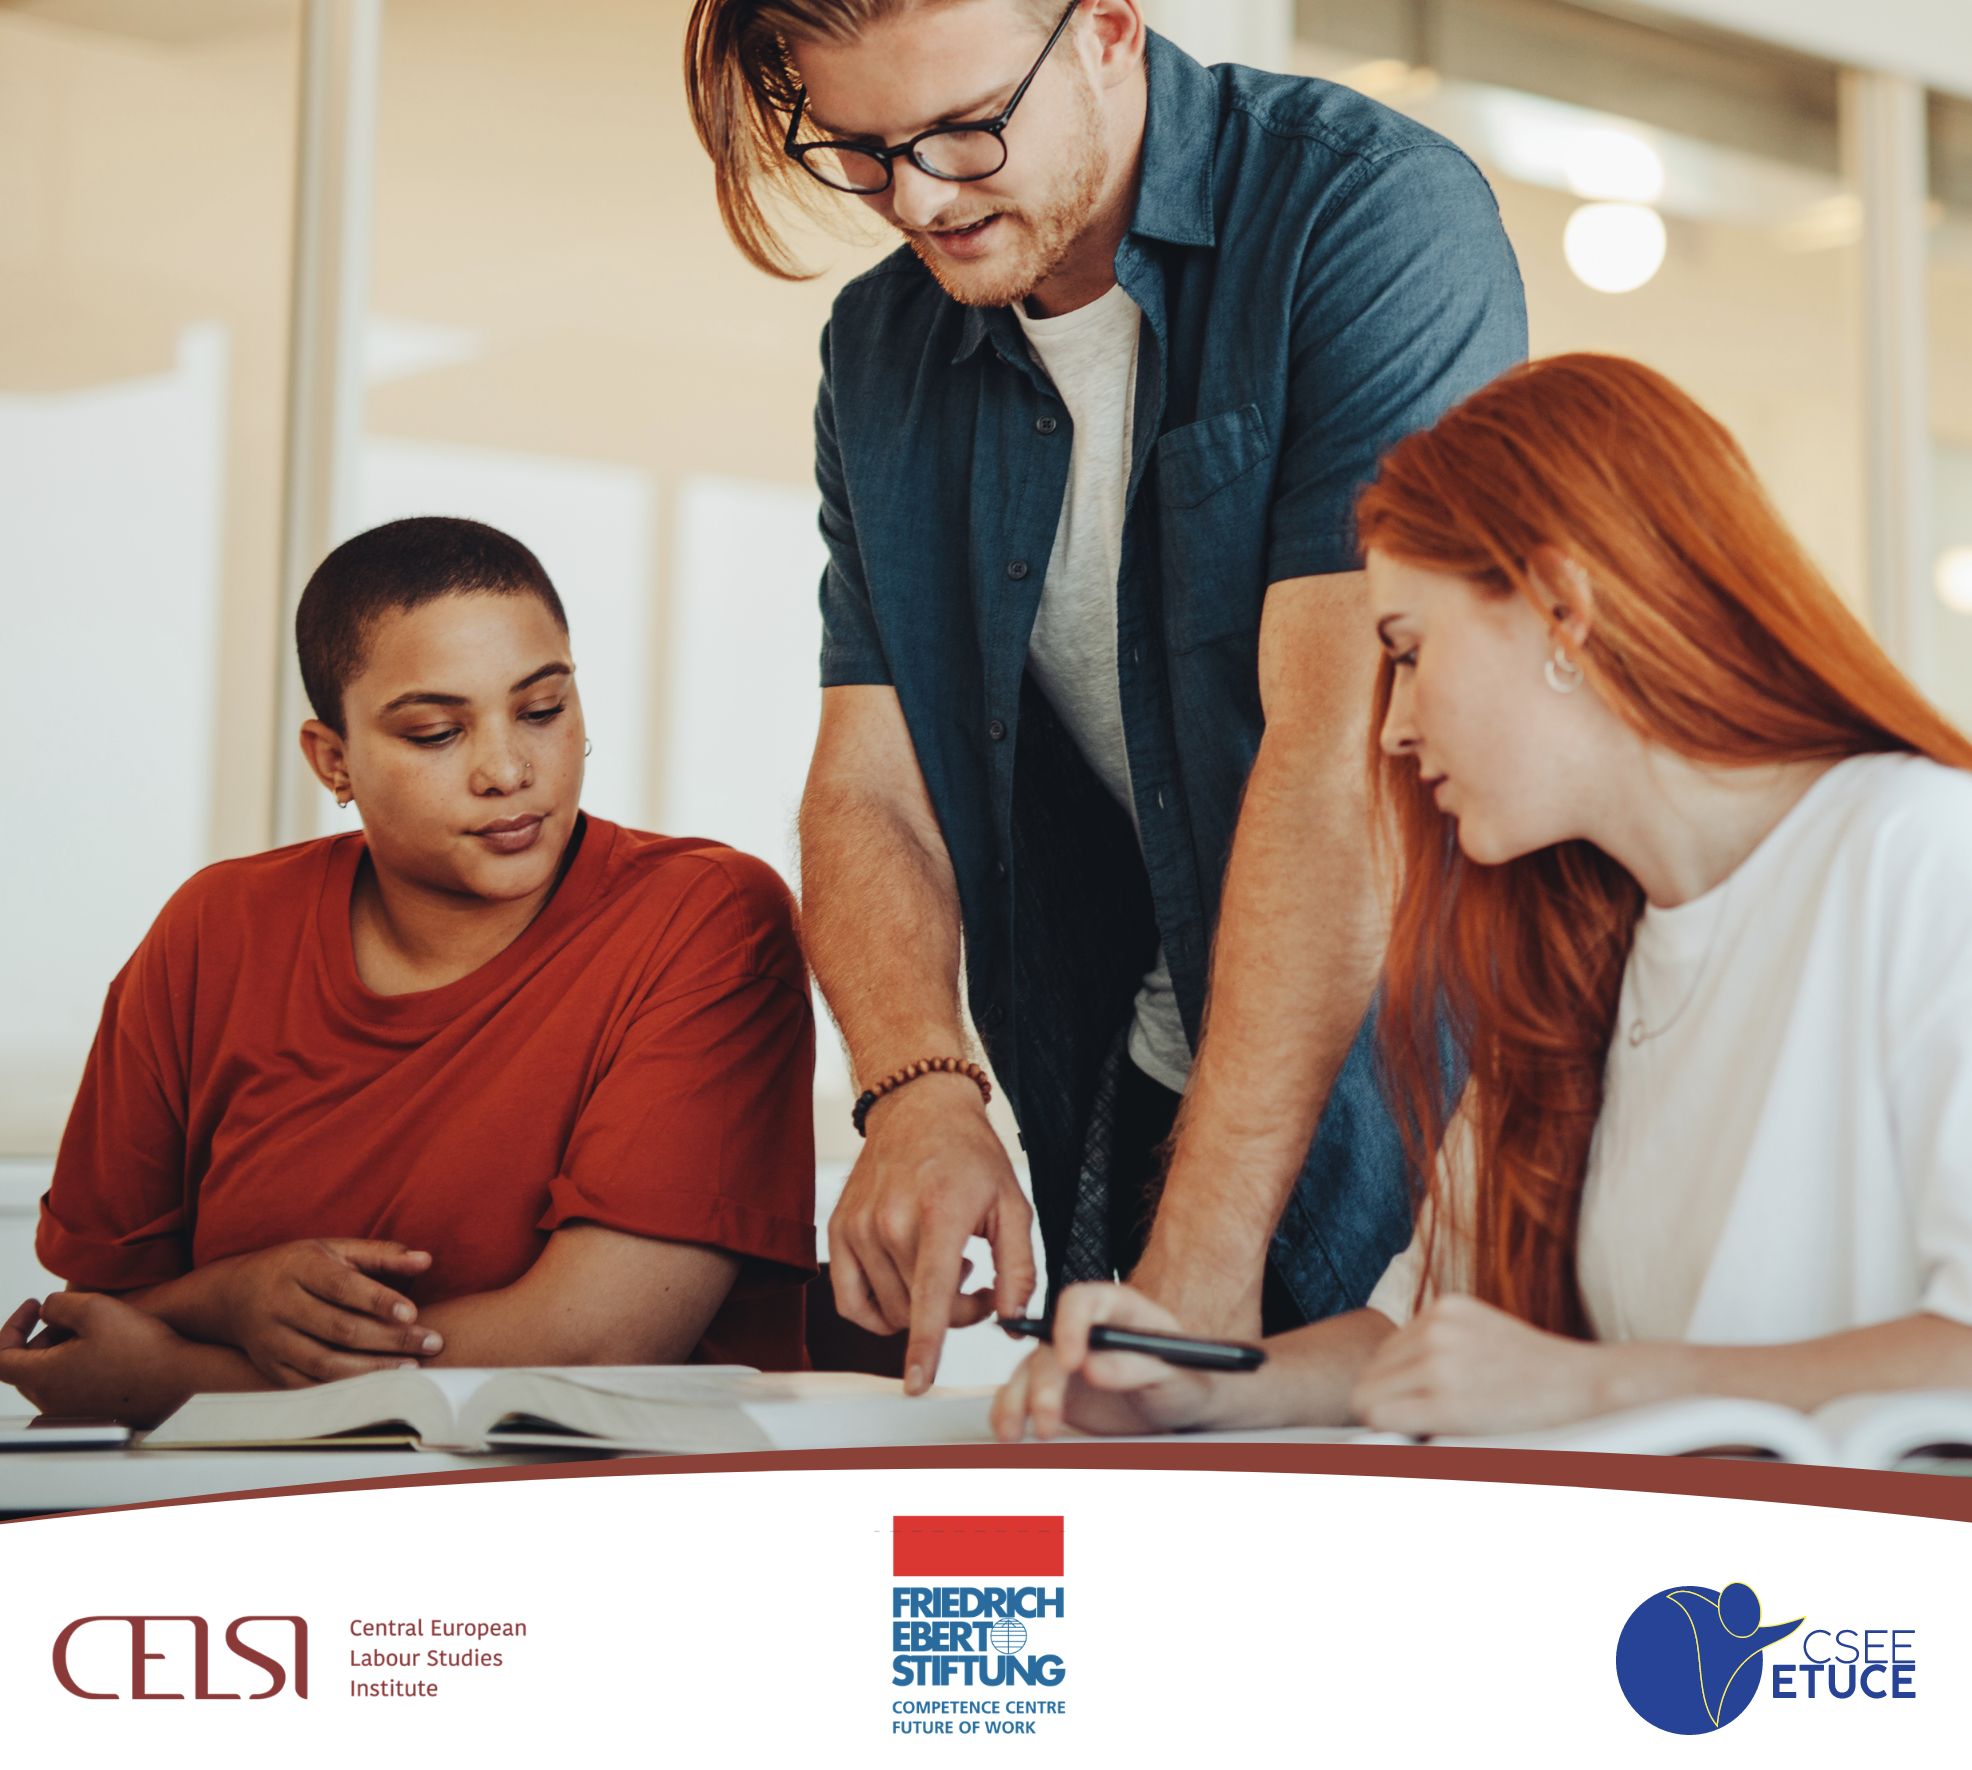 CELSI publishes new mapping study titled "Mapping the Labour Market Trends and Trade Union Policies for Young Teachers and Other Education Personnel"